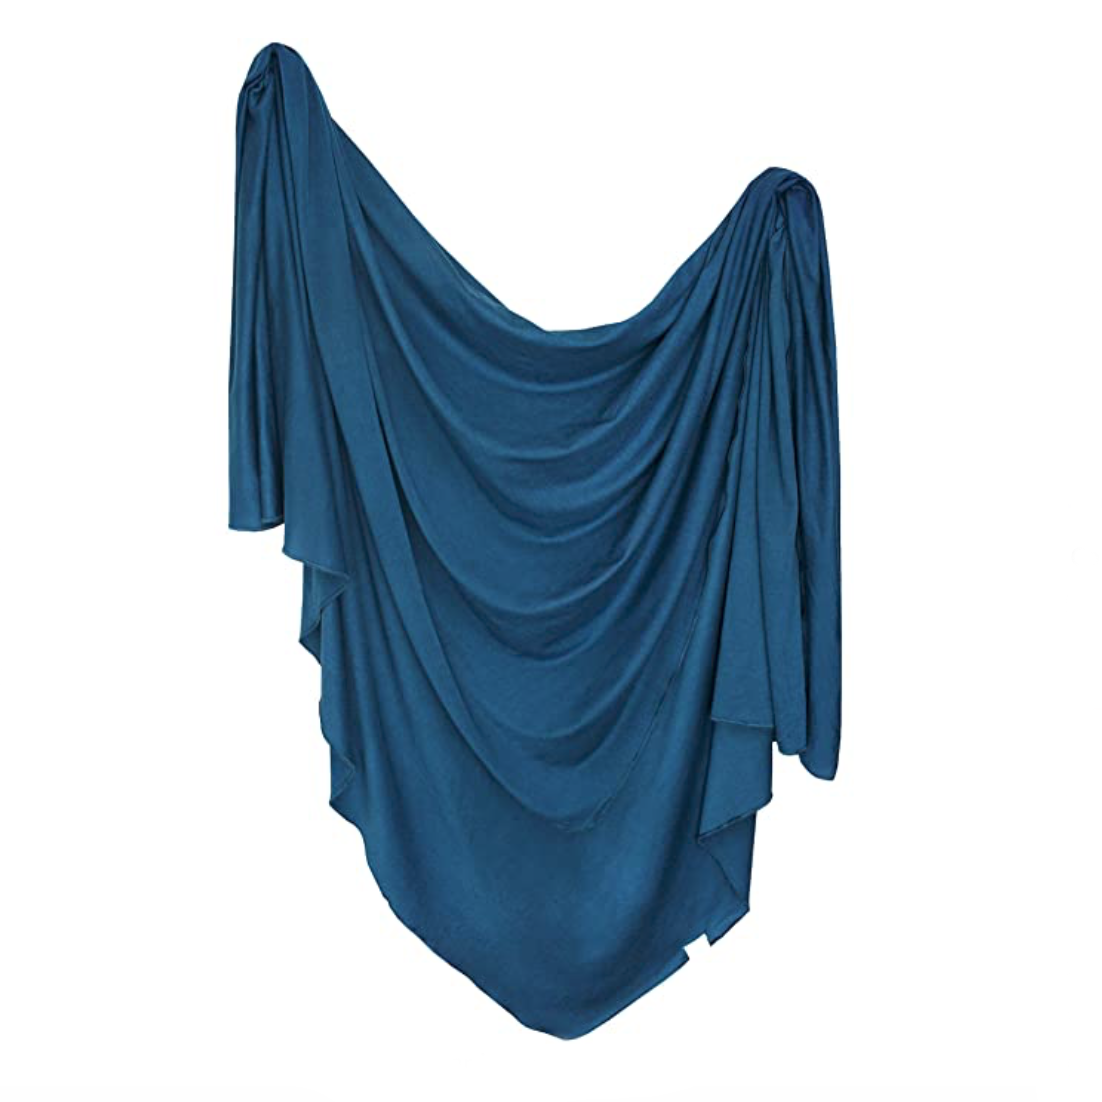 copper pearl river blue baby swaddle blanket newborn photographer.png